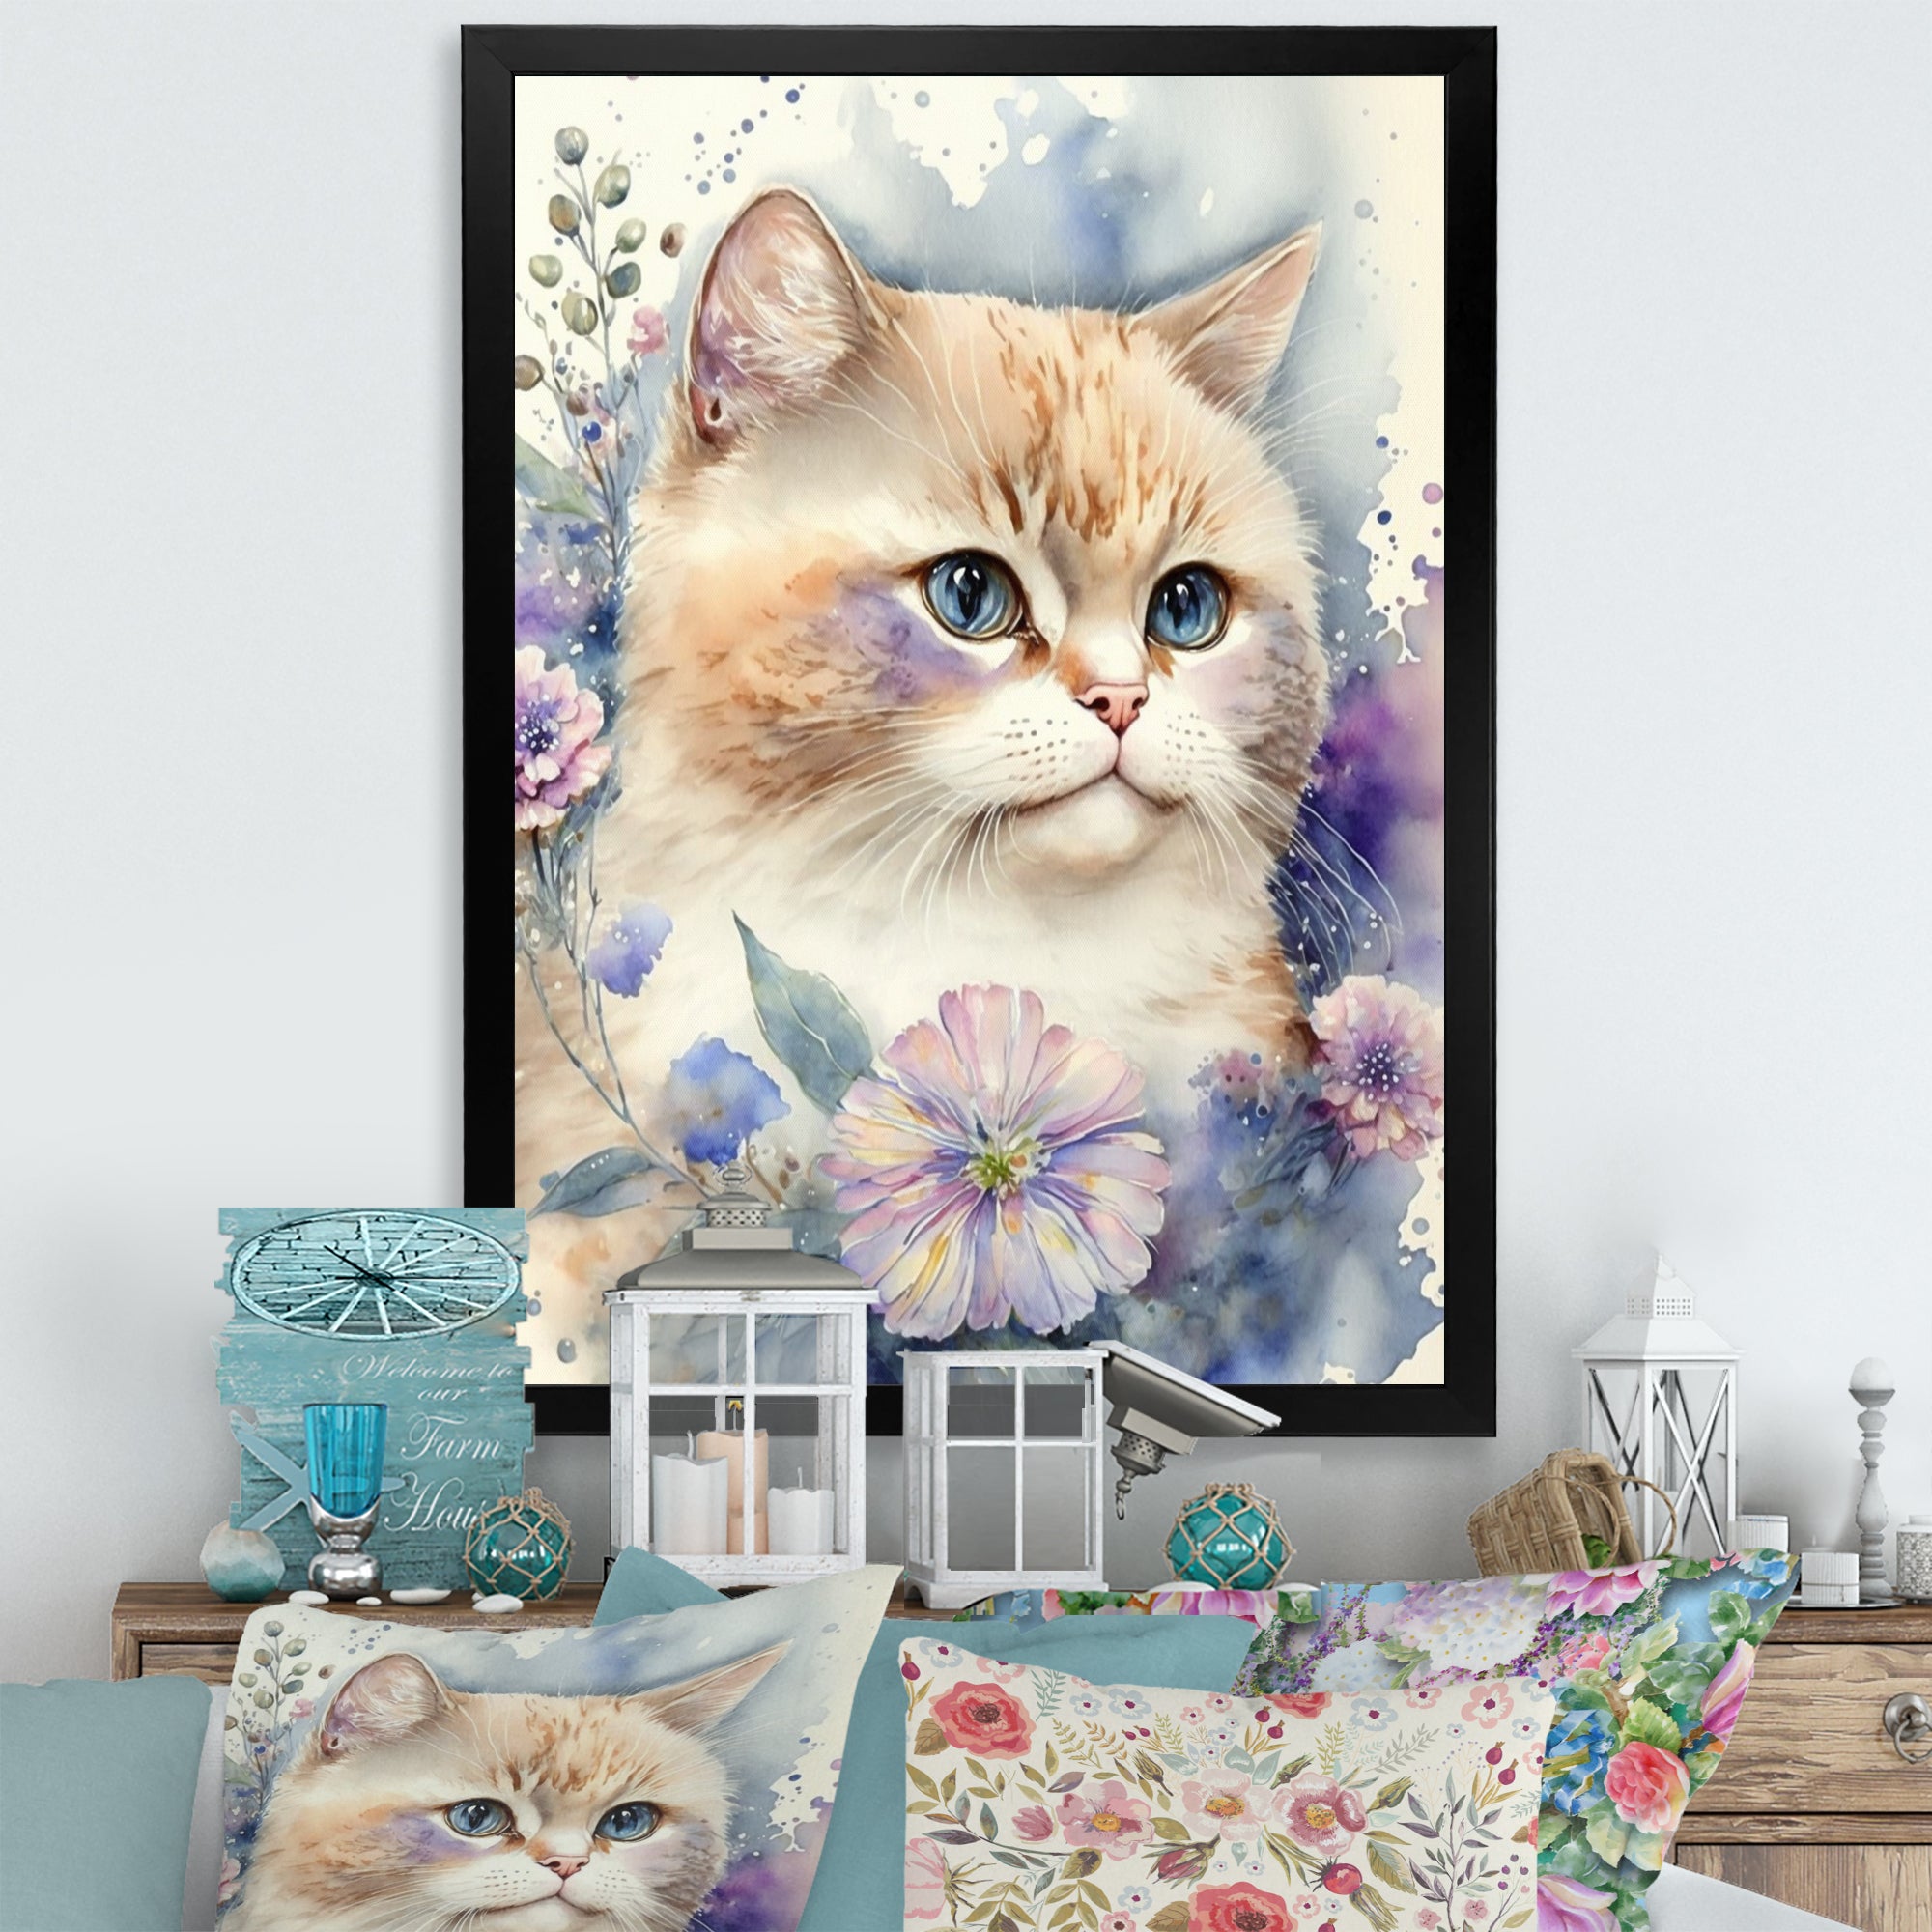 Little Kitten Surrounded By Colorful Flowers III